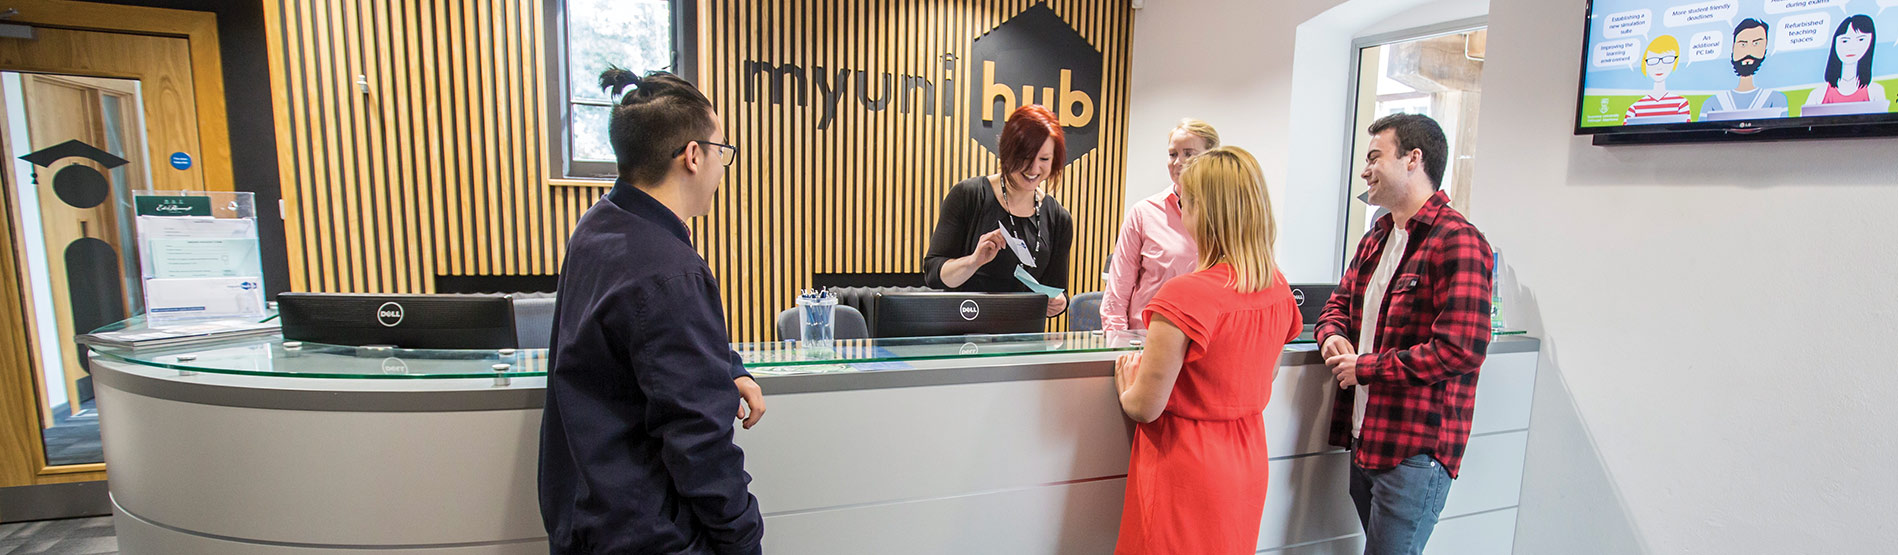 Students talking to receptionist at the Uni Hub of Swansea University.